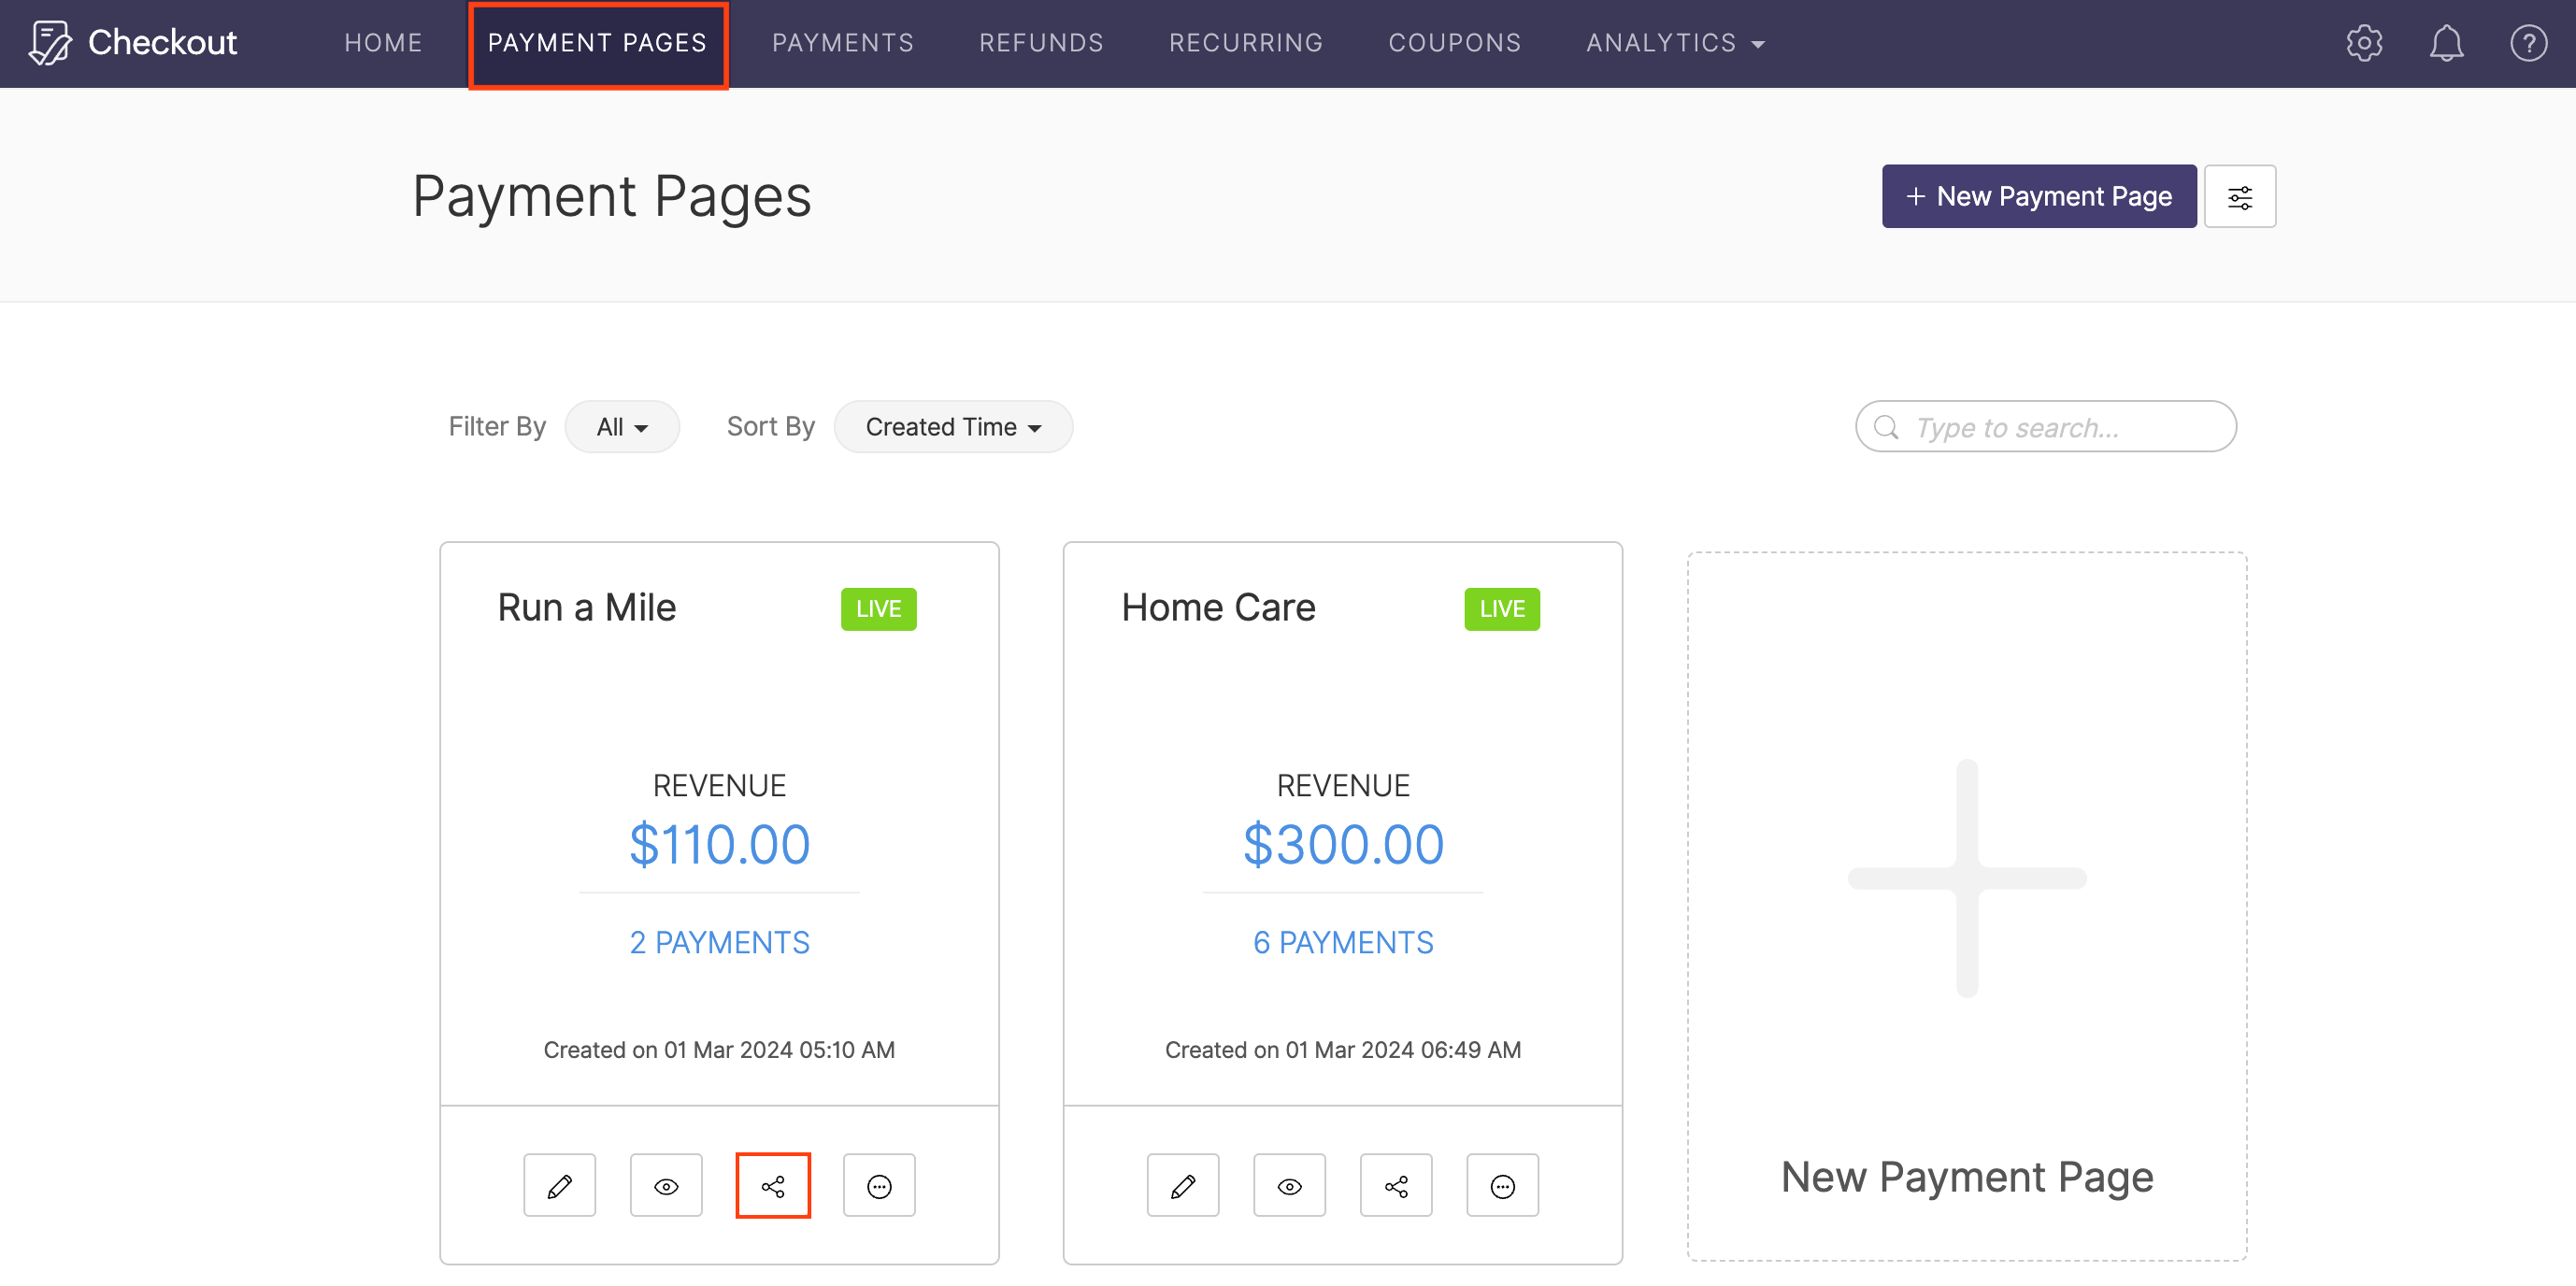 Share payment page